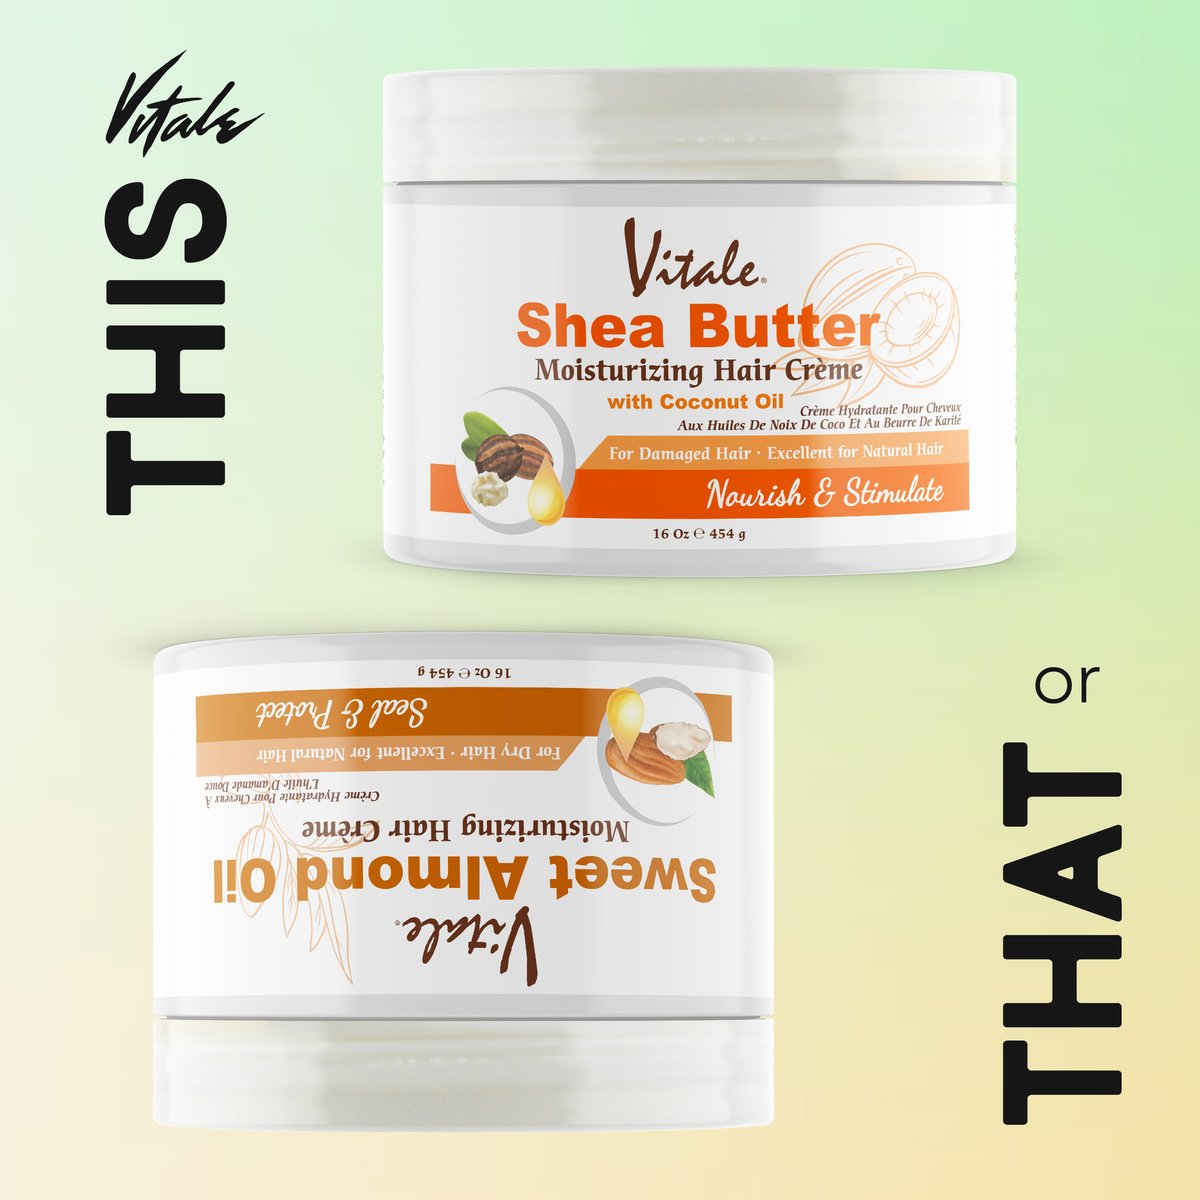 Both hair creme’s are great; however, do you prefer Shea Butter or Sweet Almond Oil for your hair?
#vitaleproducts #braids #braidsheen #protectivestyles #lockandtwistgel#sensitivescalp #stylevitae #quickweave #ghana #hairoftheday #ukcurlies #blackhairandbeauty #vitalehaircare